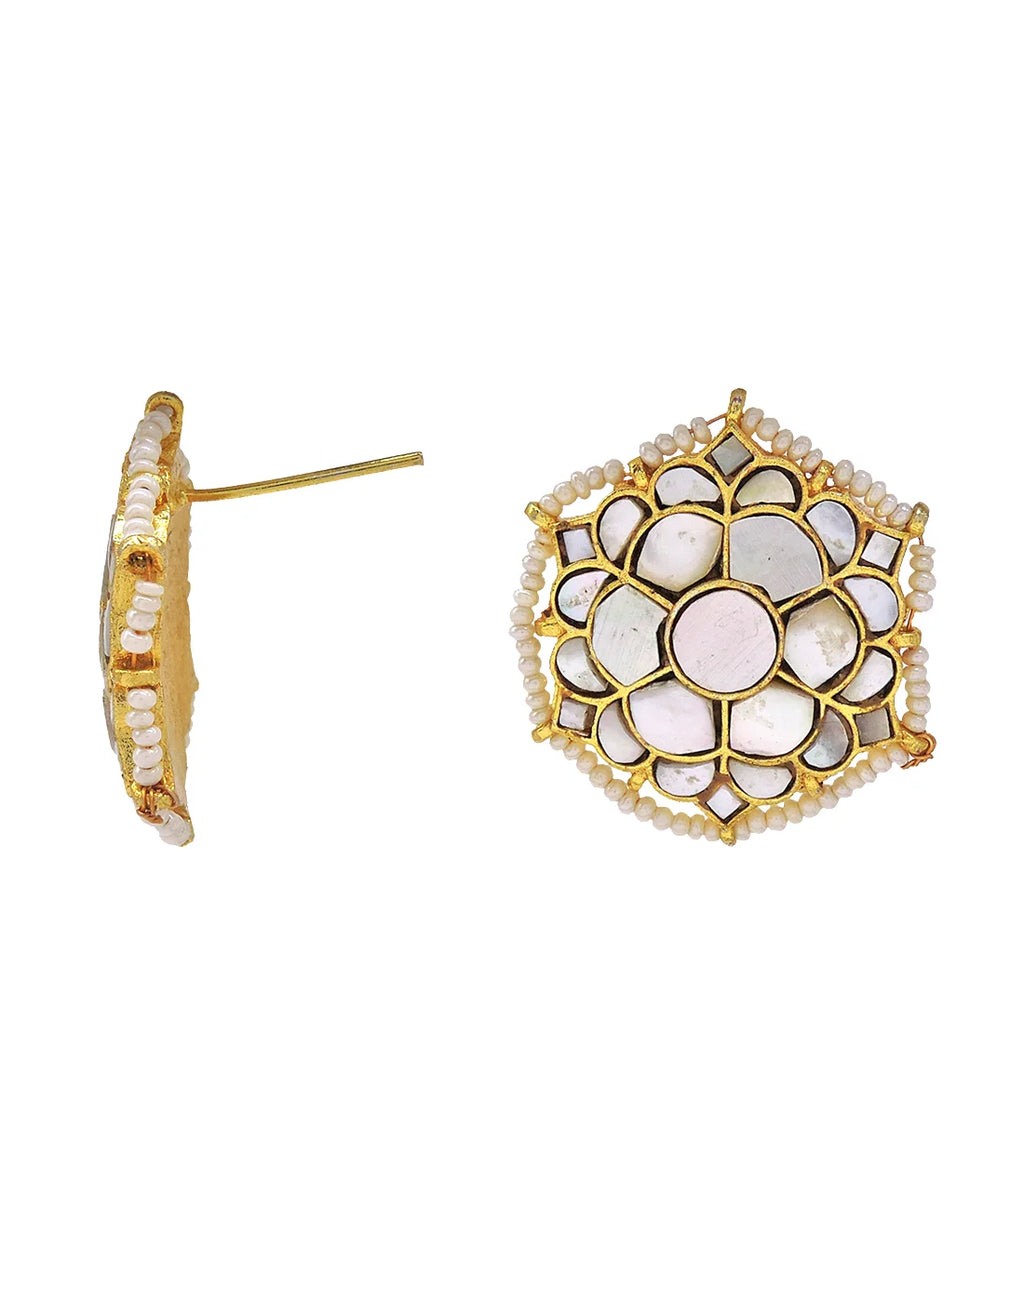 Pearl & Shell Cluster Earrings- Handcrafted Jewellery from Dori